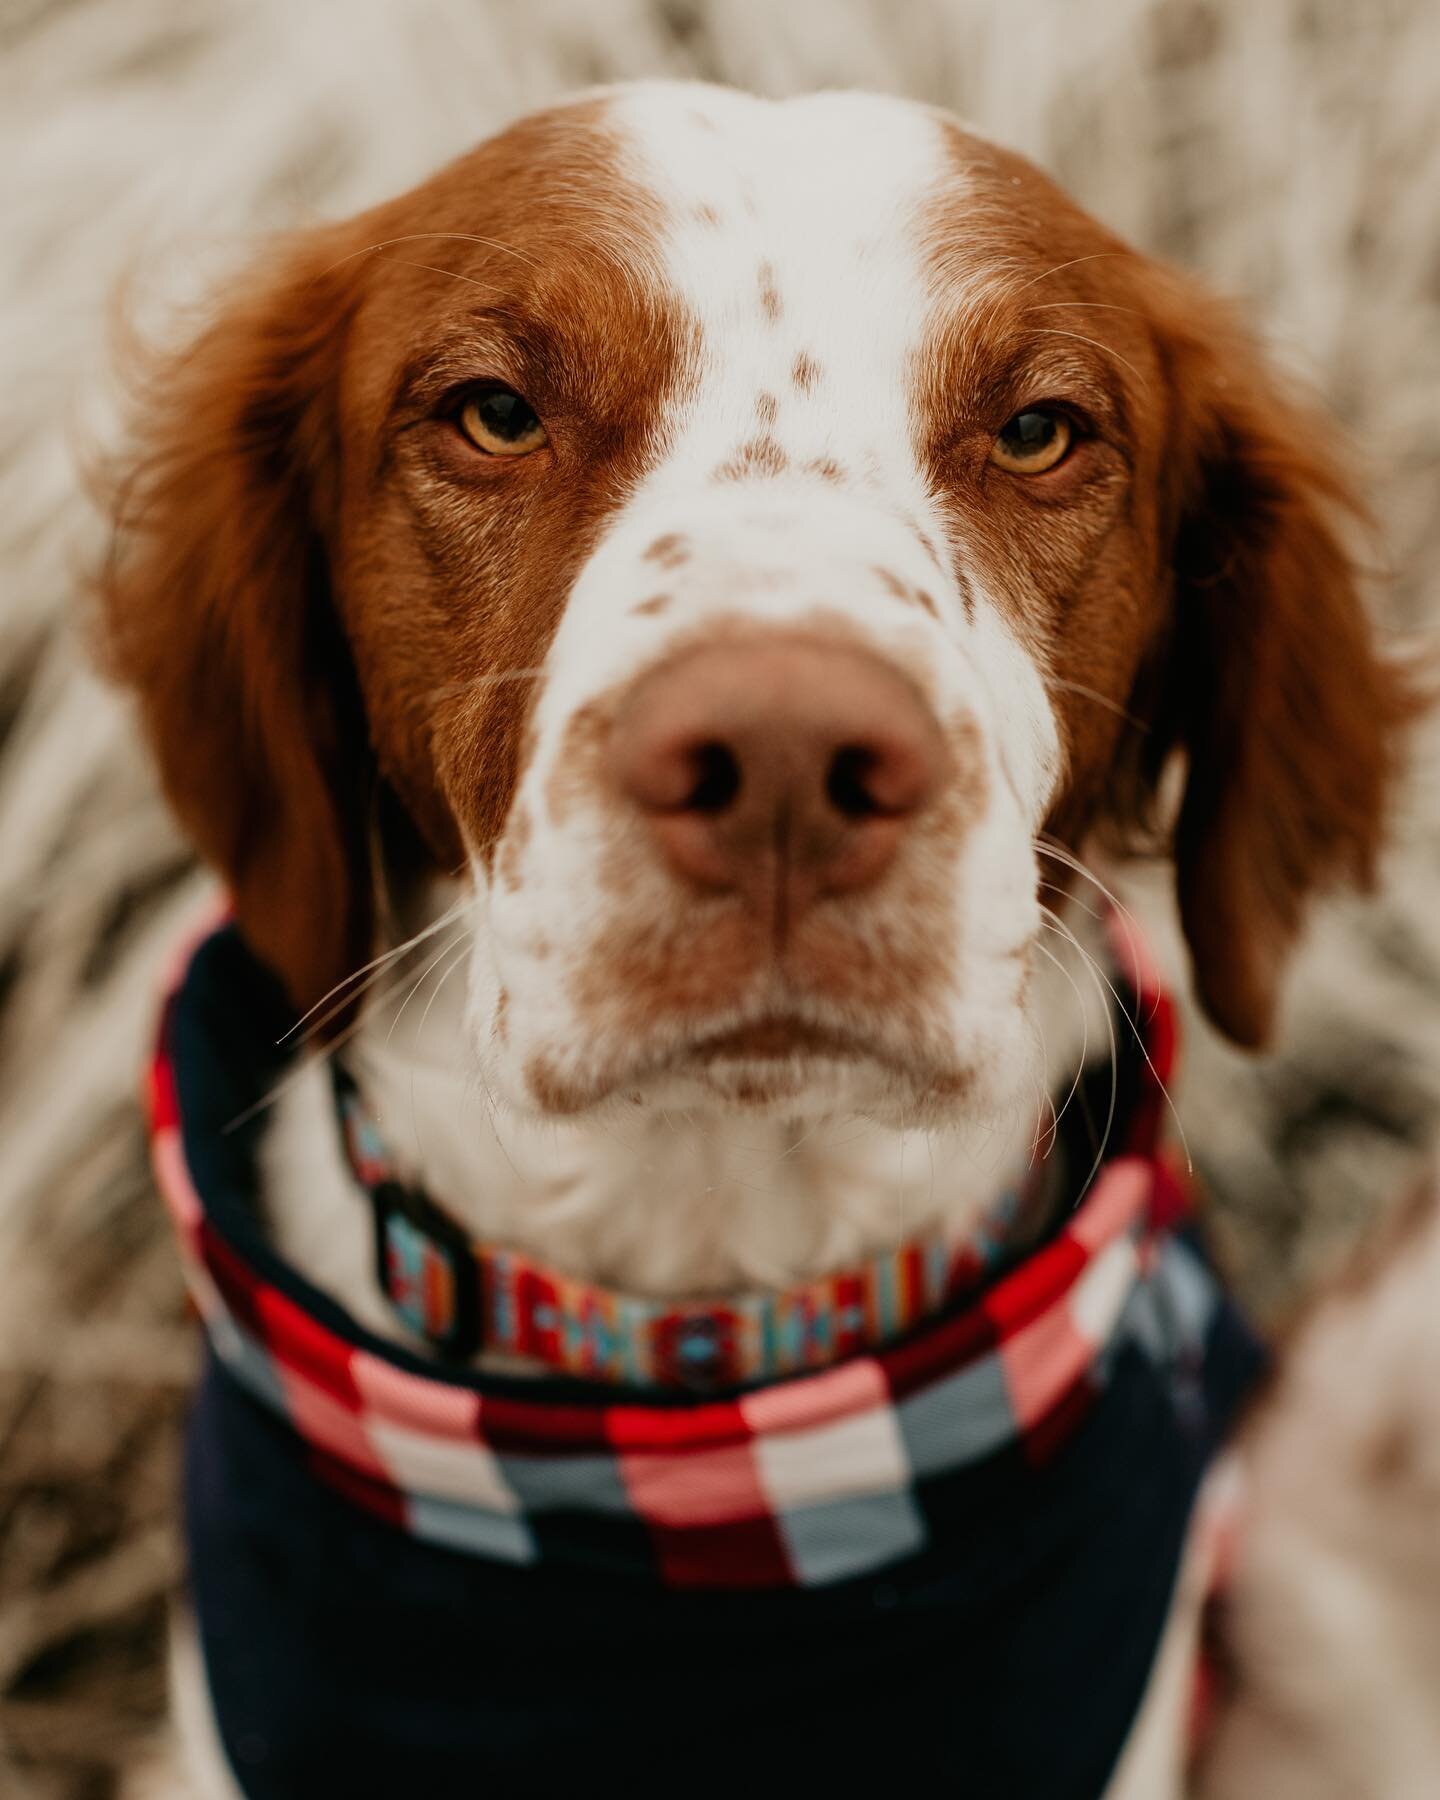 The boys are prepped for this winter storm. Hope everyone is staying safe and warm!!⁣
⁣
#brittanyspaniel #brittany #dogsofinstagram #dog #dogsofinsta #doglife #dogs #animal #animals #animalsofinstagram #winter #winterwonderland #cold #animalchiroprac